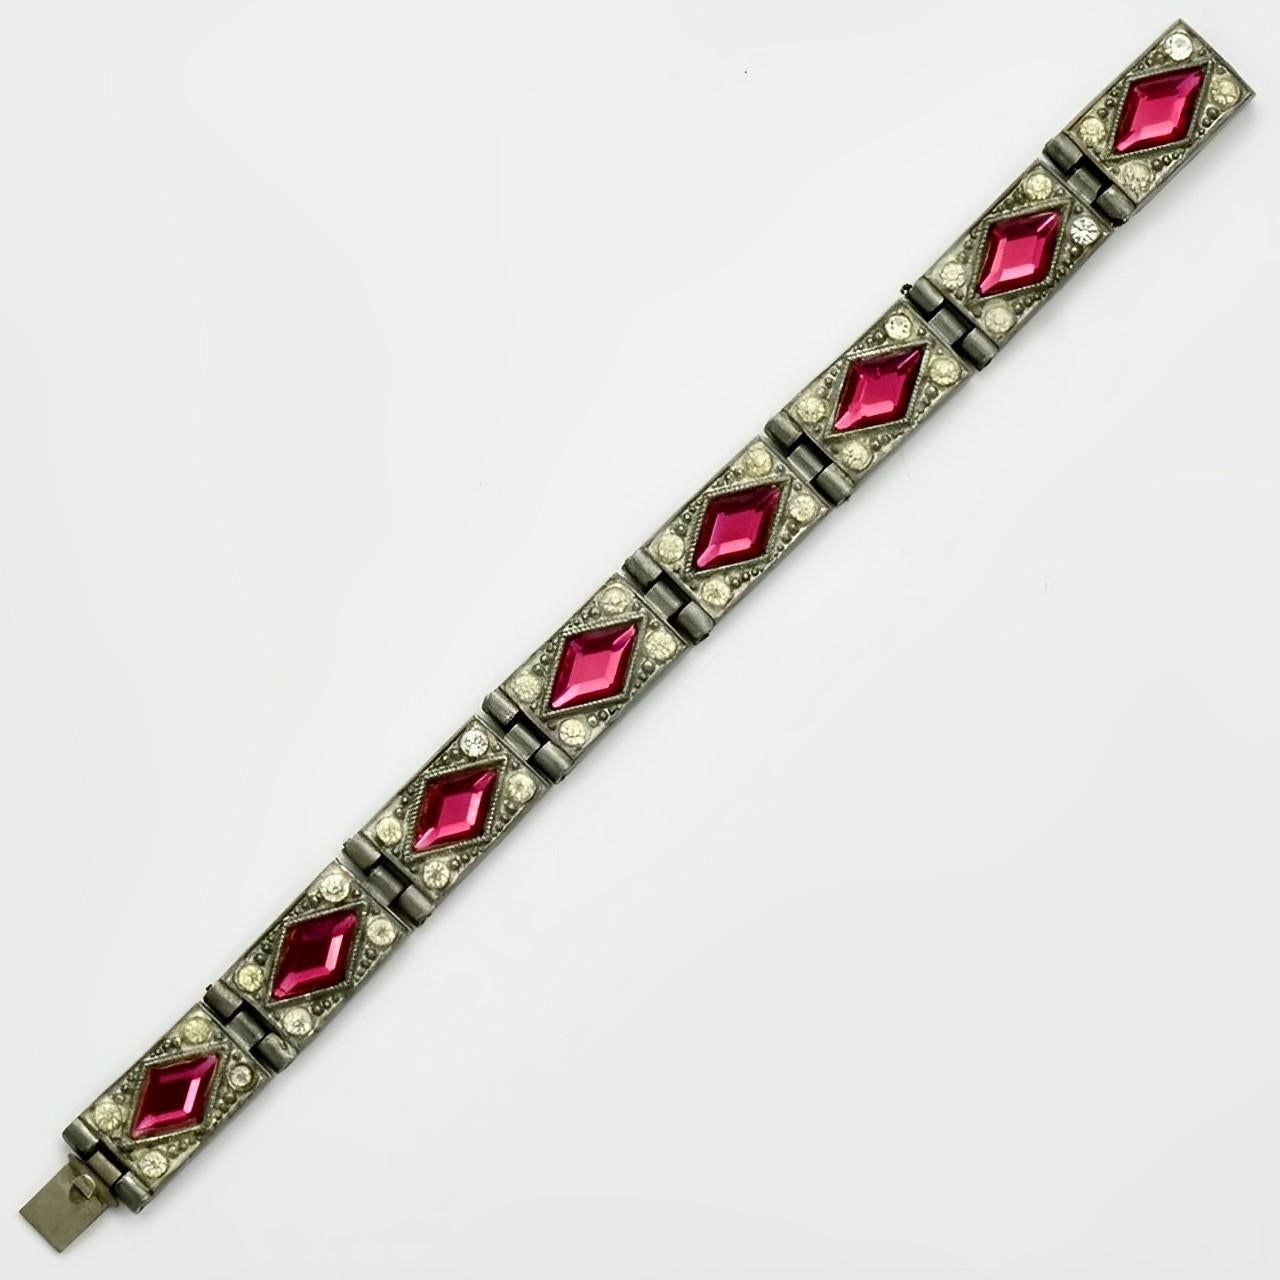 Beautiful Art Deco silver tone ornate link bracelet, featuring faceted pink diamond shaped glass stones surrounded by clear rhinestones. It is probably Czech. Length 15.9 cm / 6.25 inches by width 1.1 cm / .43 inch. The clasp works well. Some of the